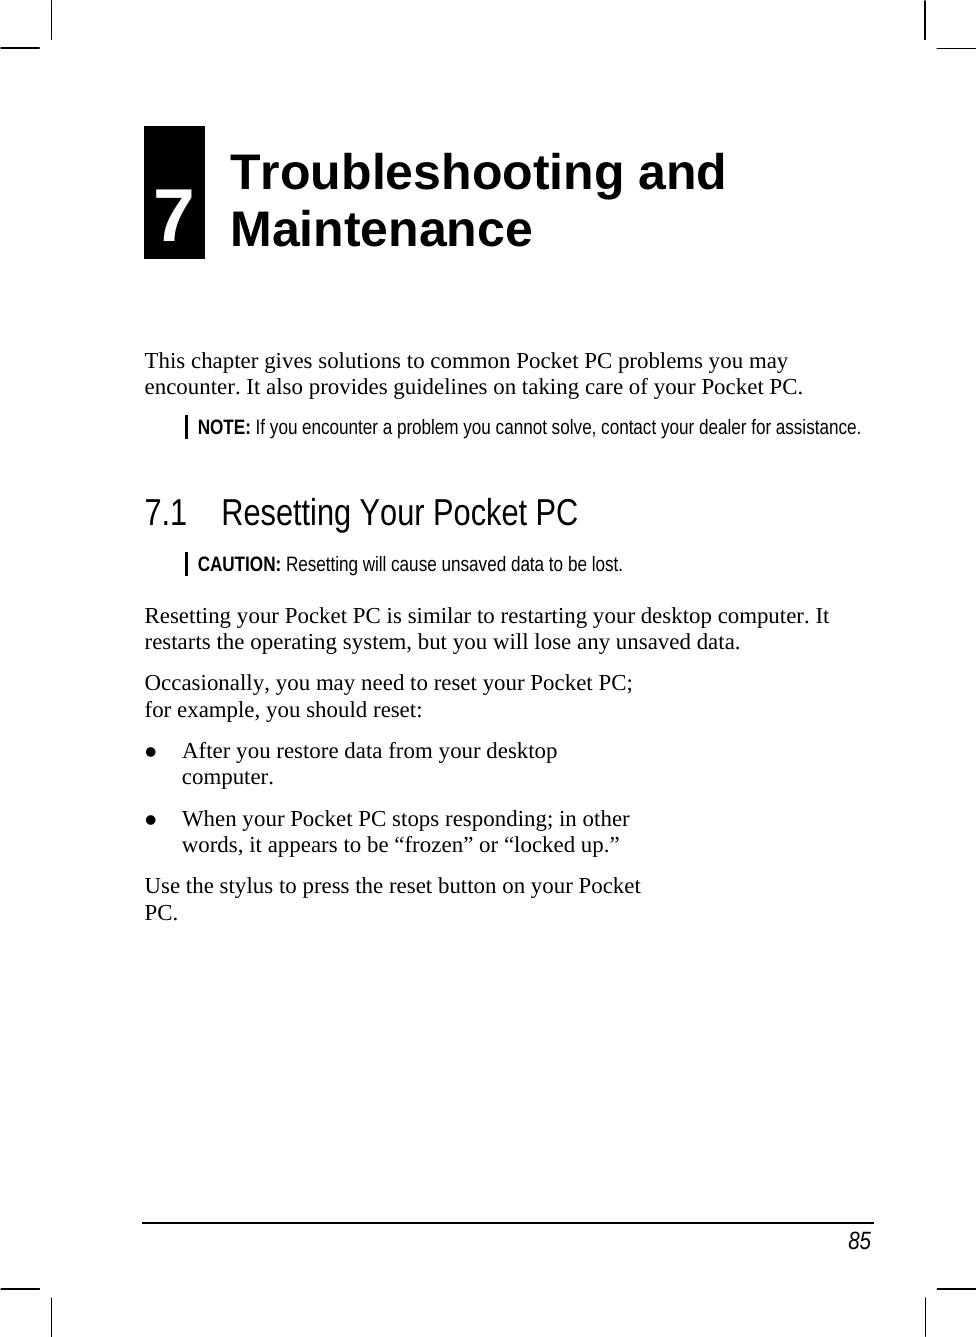   85 7 Troubleshooting and Maintenance This chapter gives solutions to common Pocket PC problems you may encounter. It also provides guidelines on taking care of your Pocket PC. NOTE: If you encounter a problem you cannot solve, contact your dealer for assistance.  7.1 Resetting Your Pocket PC CAUTION: Resetting will cause unsaved data to be lost.  Resetting your Pocket PC is similar to restarting your desktop computer. It restarts the operating system, but you will lose any unsaved data. Occasionally, you may need to reset your Pocket PC; for example, you should reset: z After you restore data from your desktop computer. z When your Pocket PC stops responding; in other words, it appears to be “frozen” or “locked up.” Use the stylus to press the reset button on your Pocket PC.    Troubleshooting and  Maintenance 